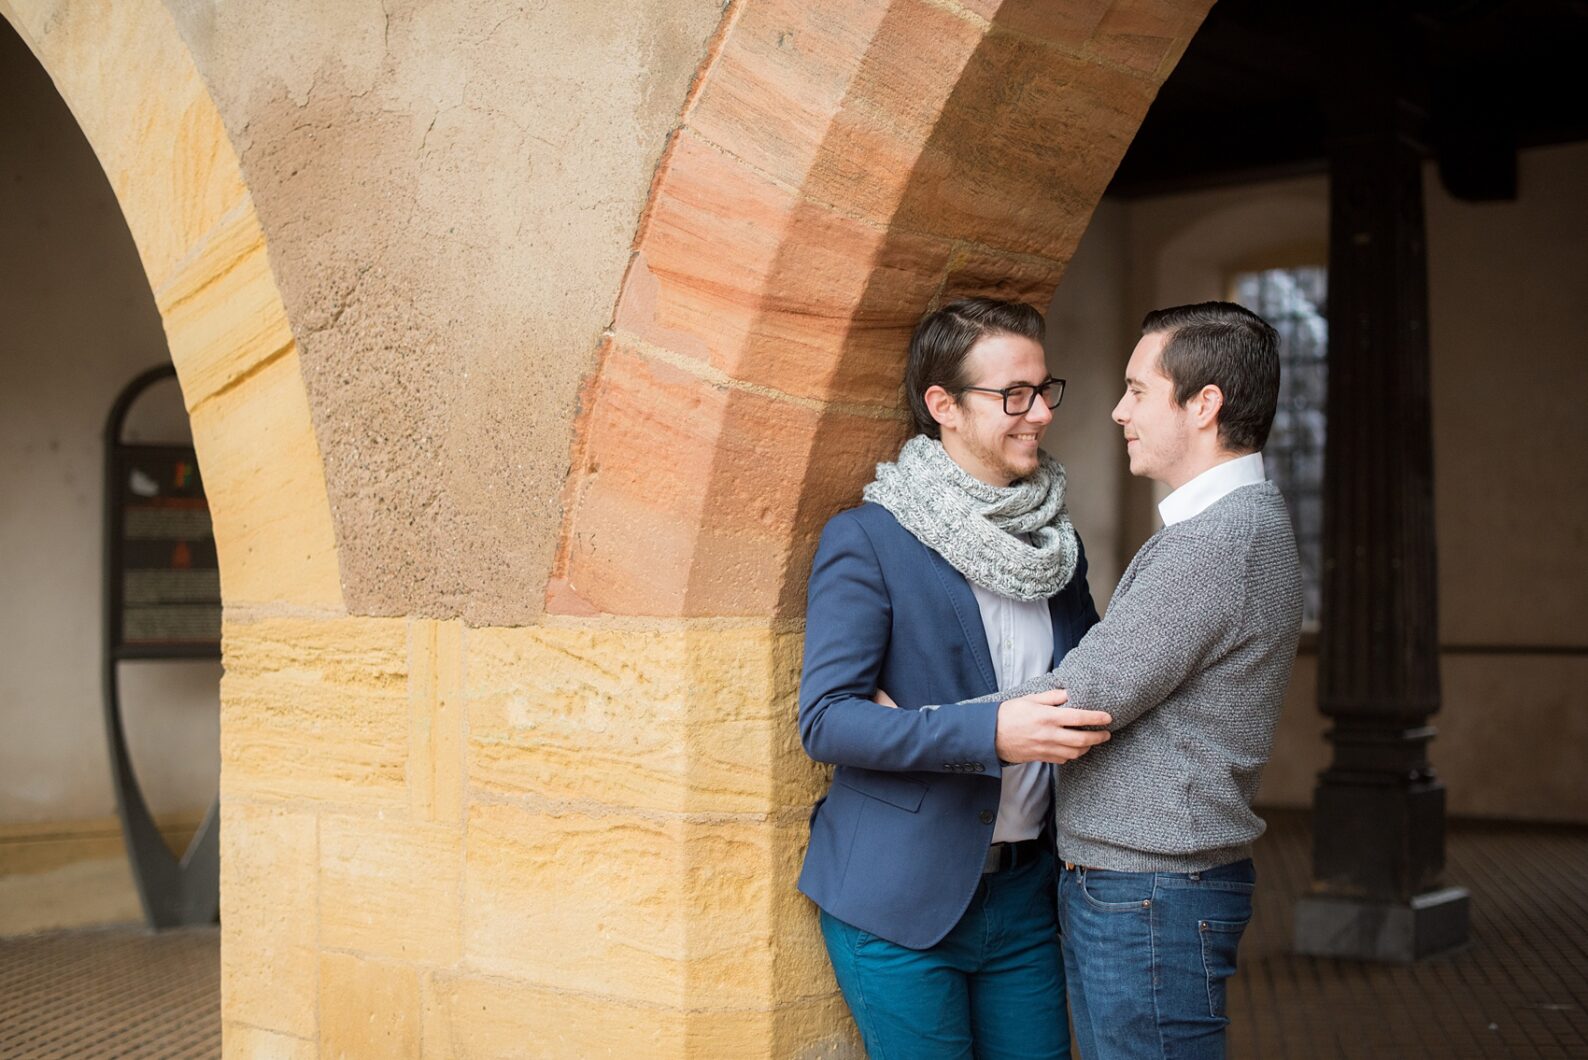 Mikkel Paige Photography pictures of an engagement session in Colmar, France in the Alsace region. Photo of the same sex/gay couple in the colorful, historic village.